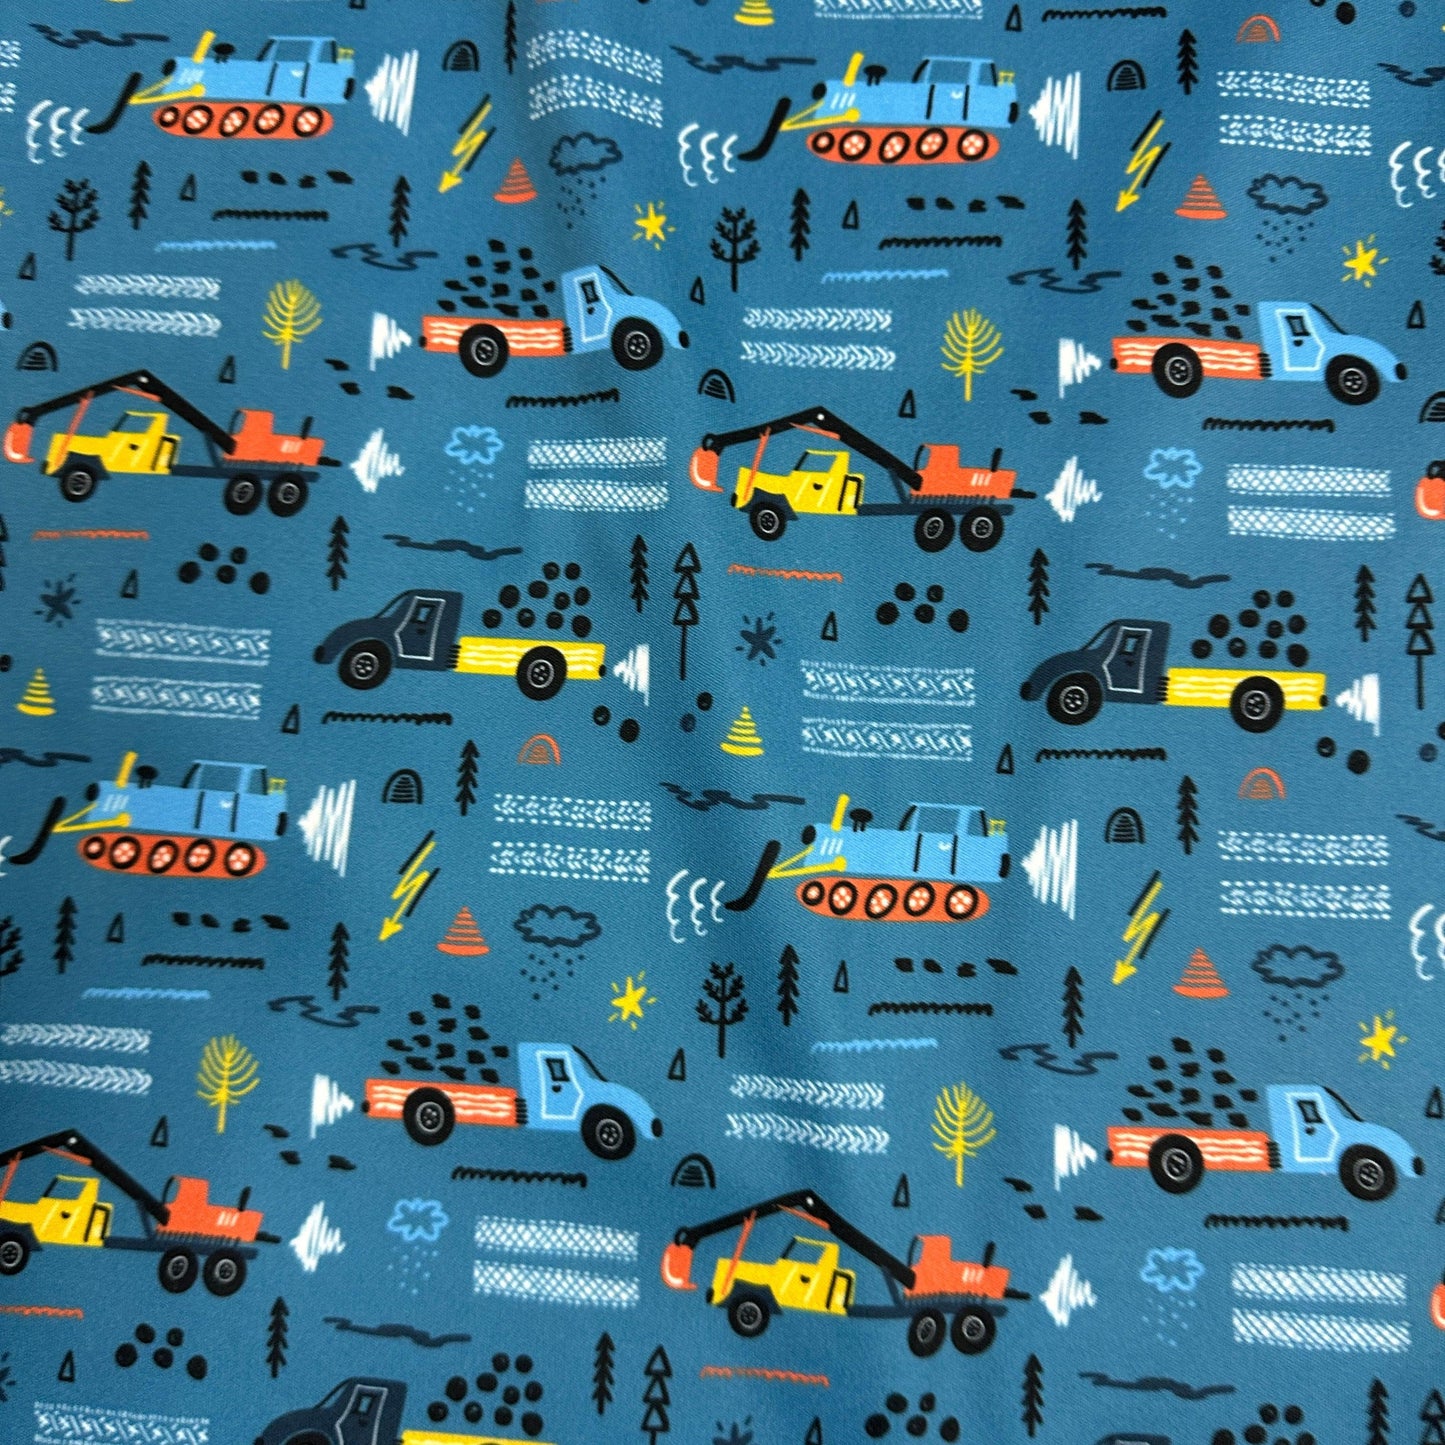 Trucks and Bulldozers on 1 mil PUL Fabric - Made in the USA - Nature's Fabrics